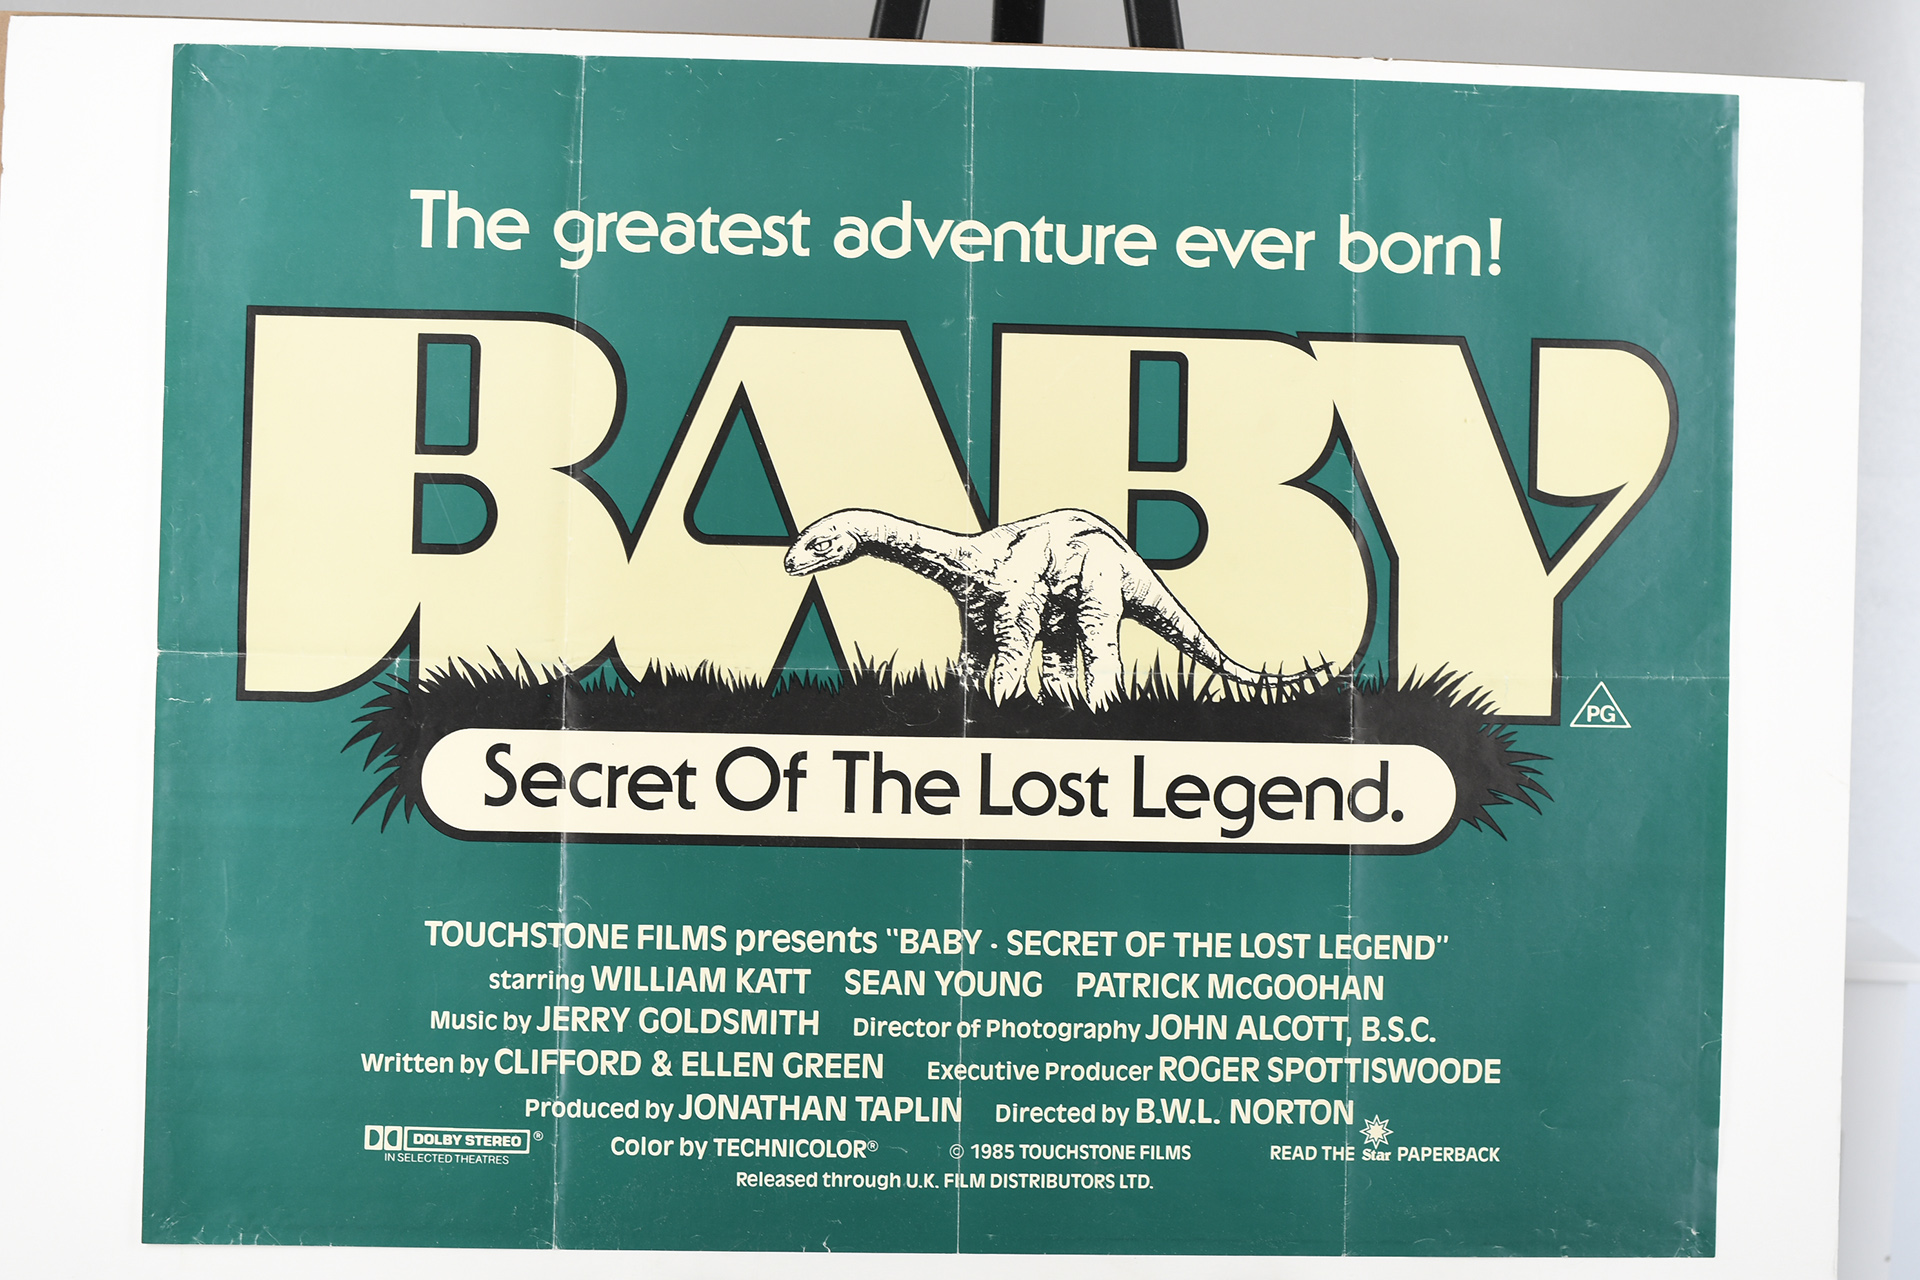 Original Film Poster from "Baby: Secret of the Lost Legend"